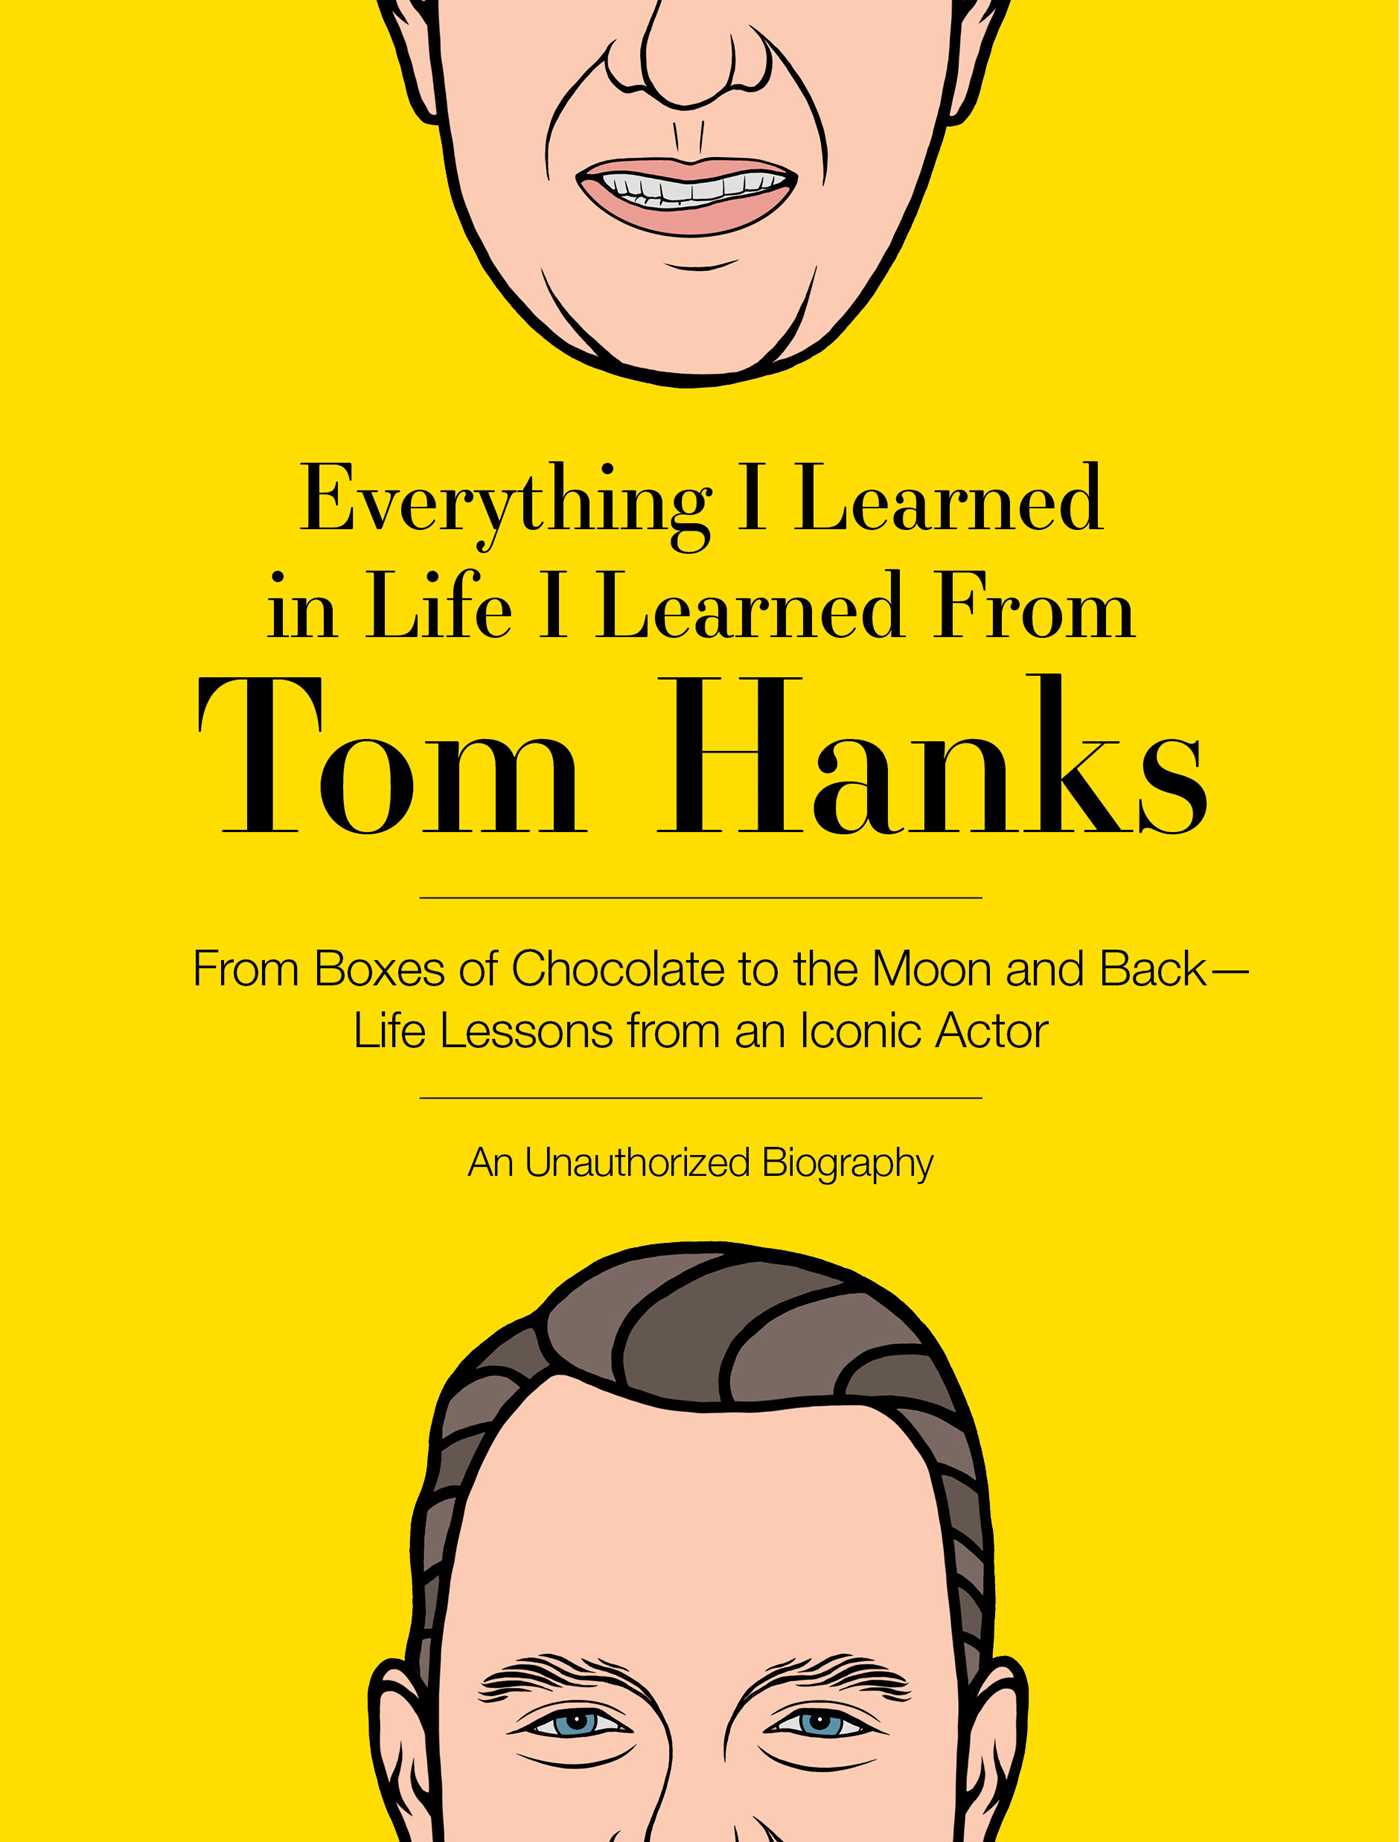 Everything I Learned in Life I Learned From Tom Hanks: From Boxes of Chocolate to Infinity and Beyond - Life Lessons From An Iconic Actor: An Unauthorized Biography